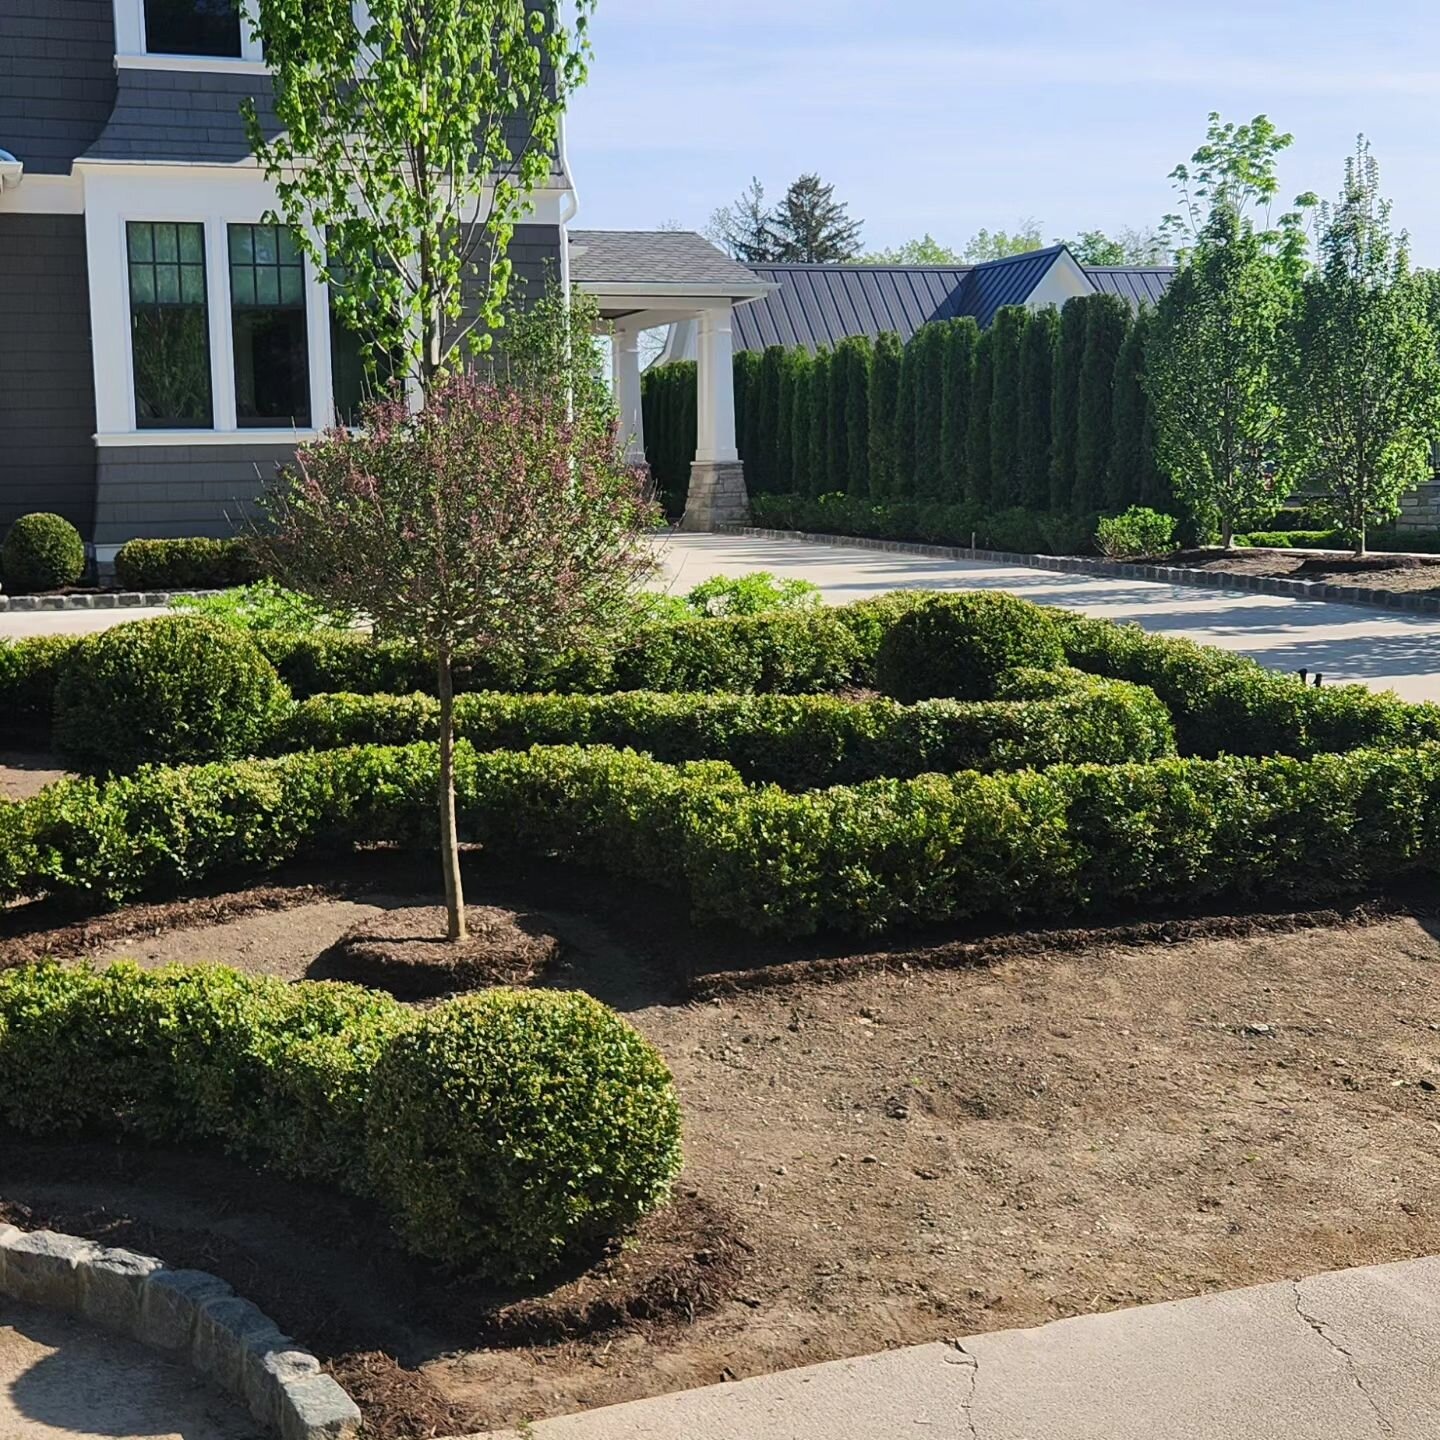 Specimen trees and shrubs being installed at our Northville project. 
#boxwood #arborvitae #landscapearchitect #landscapedesign